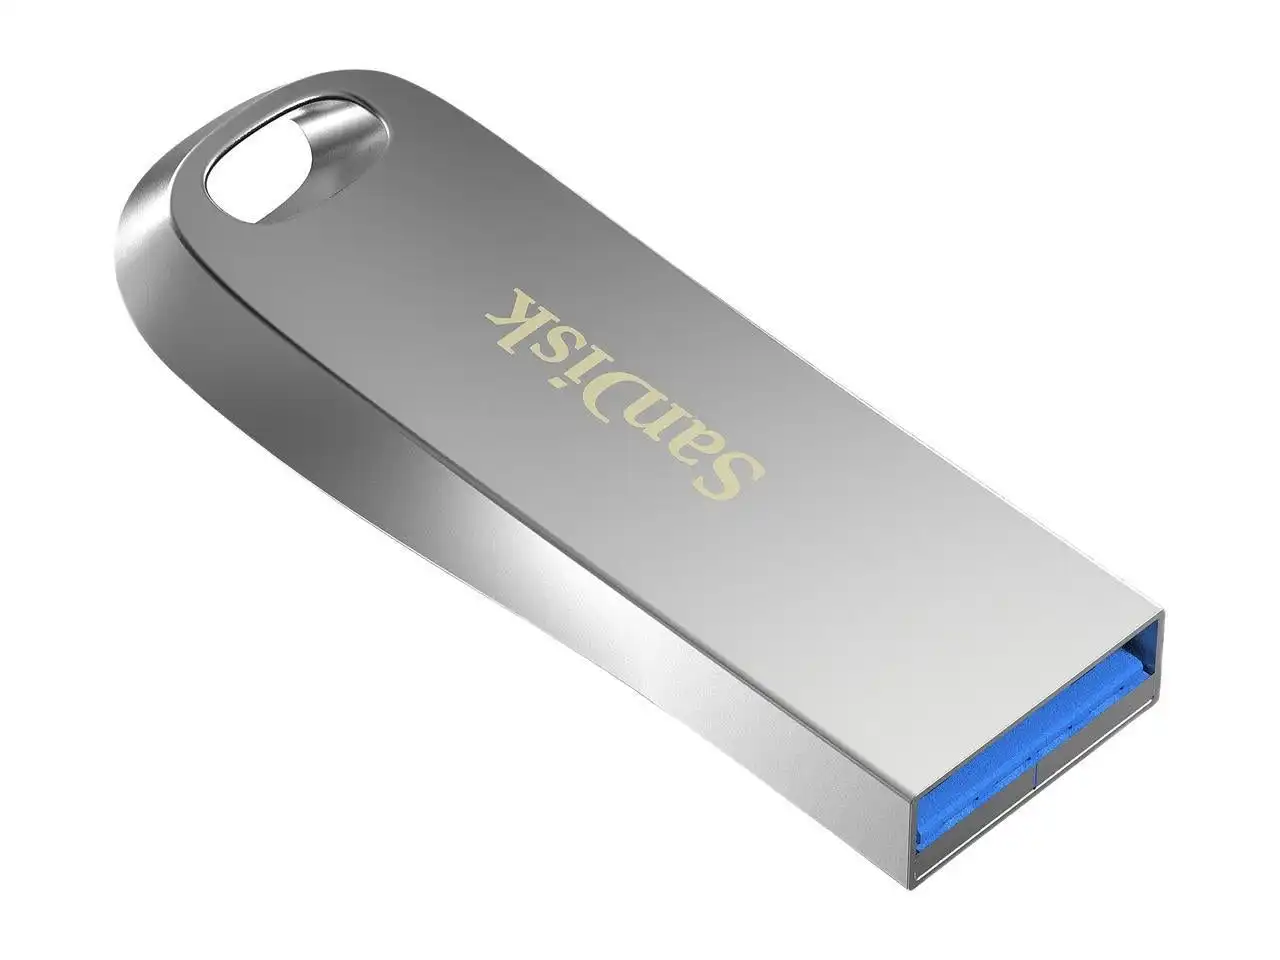 Sandisk Sdcz74 128g G46 128g Ultra Luxe Pen Drive 150mb Usb 3.0 Metal